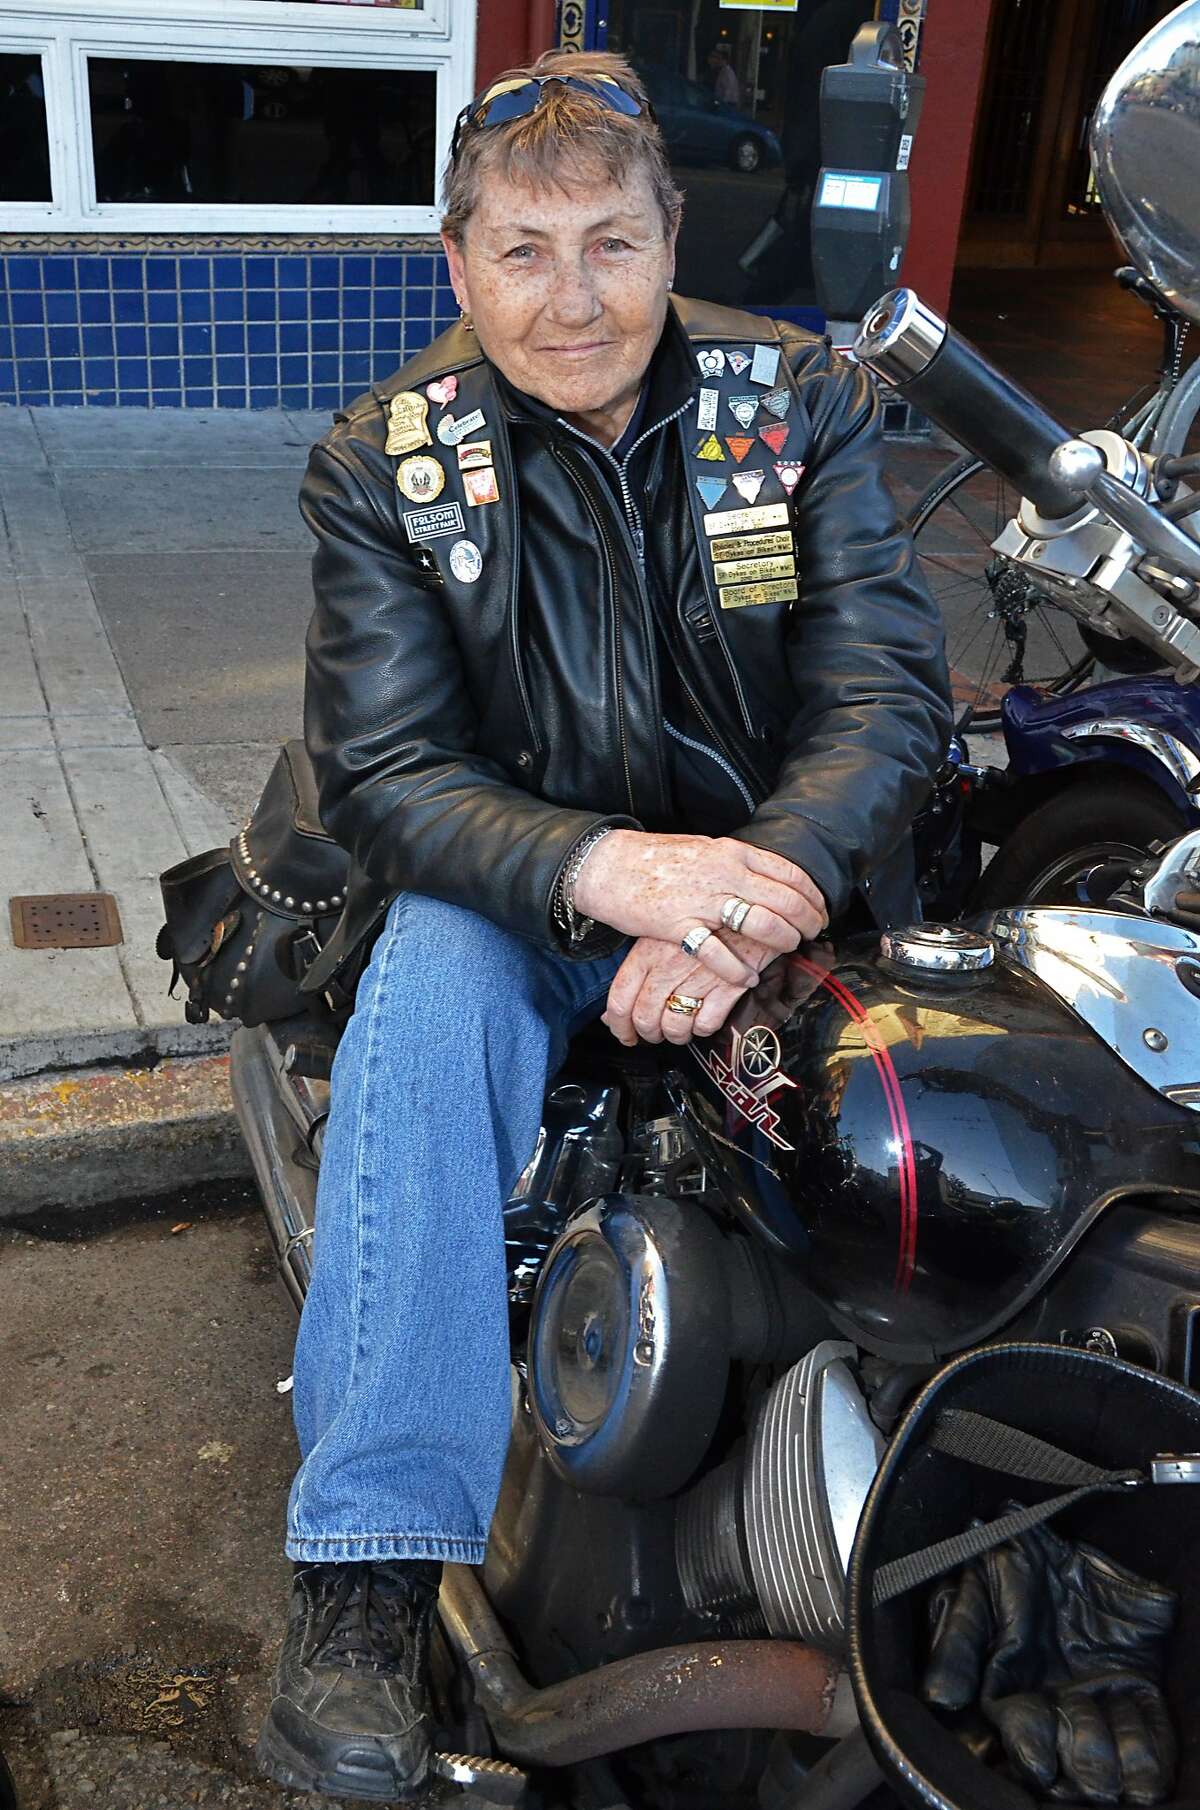 Soni Wolf, one of the founders of Dykes on Bikes